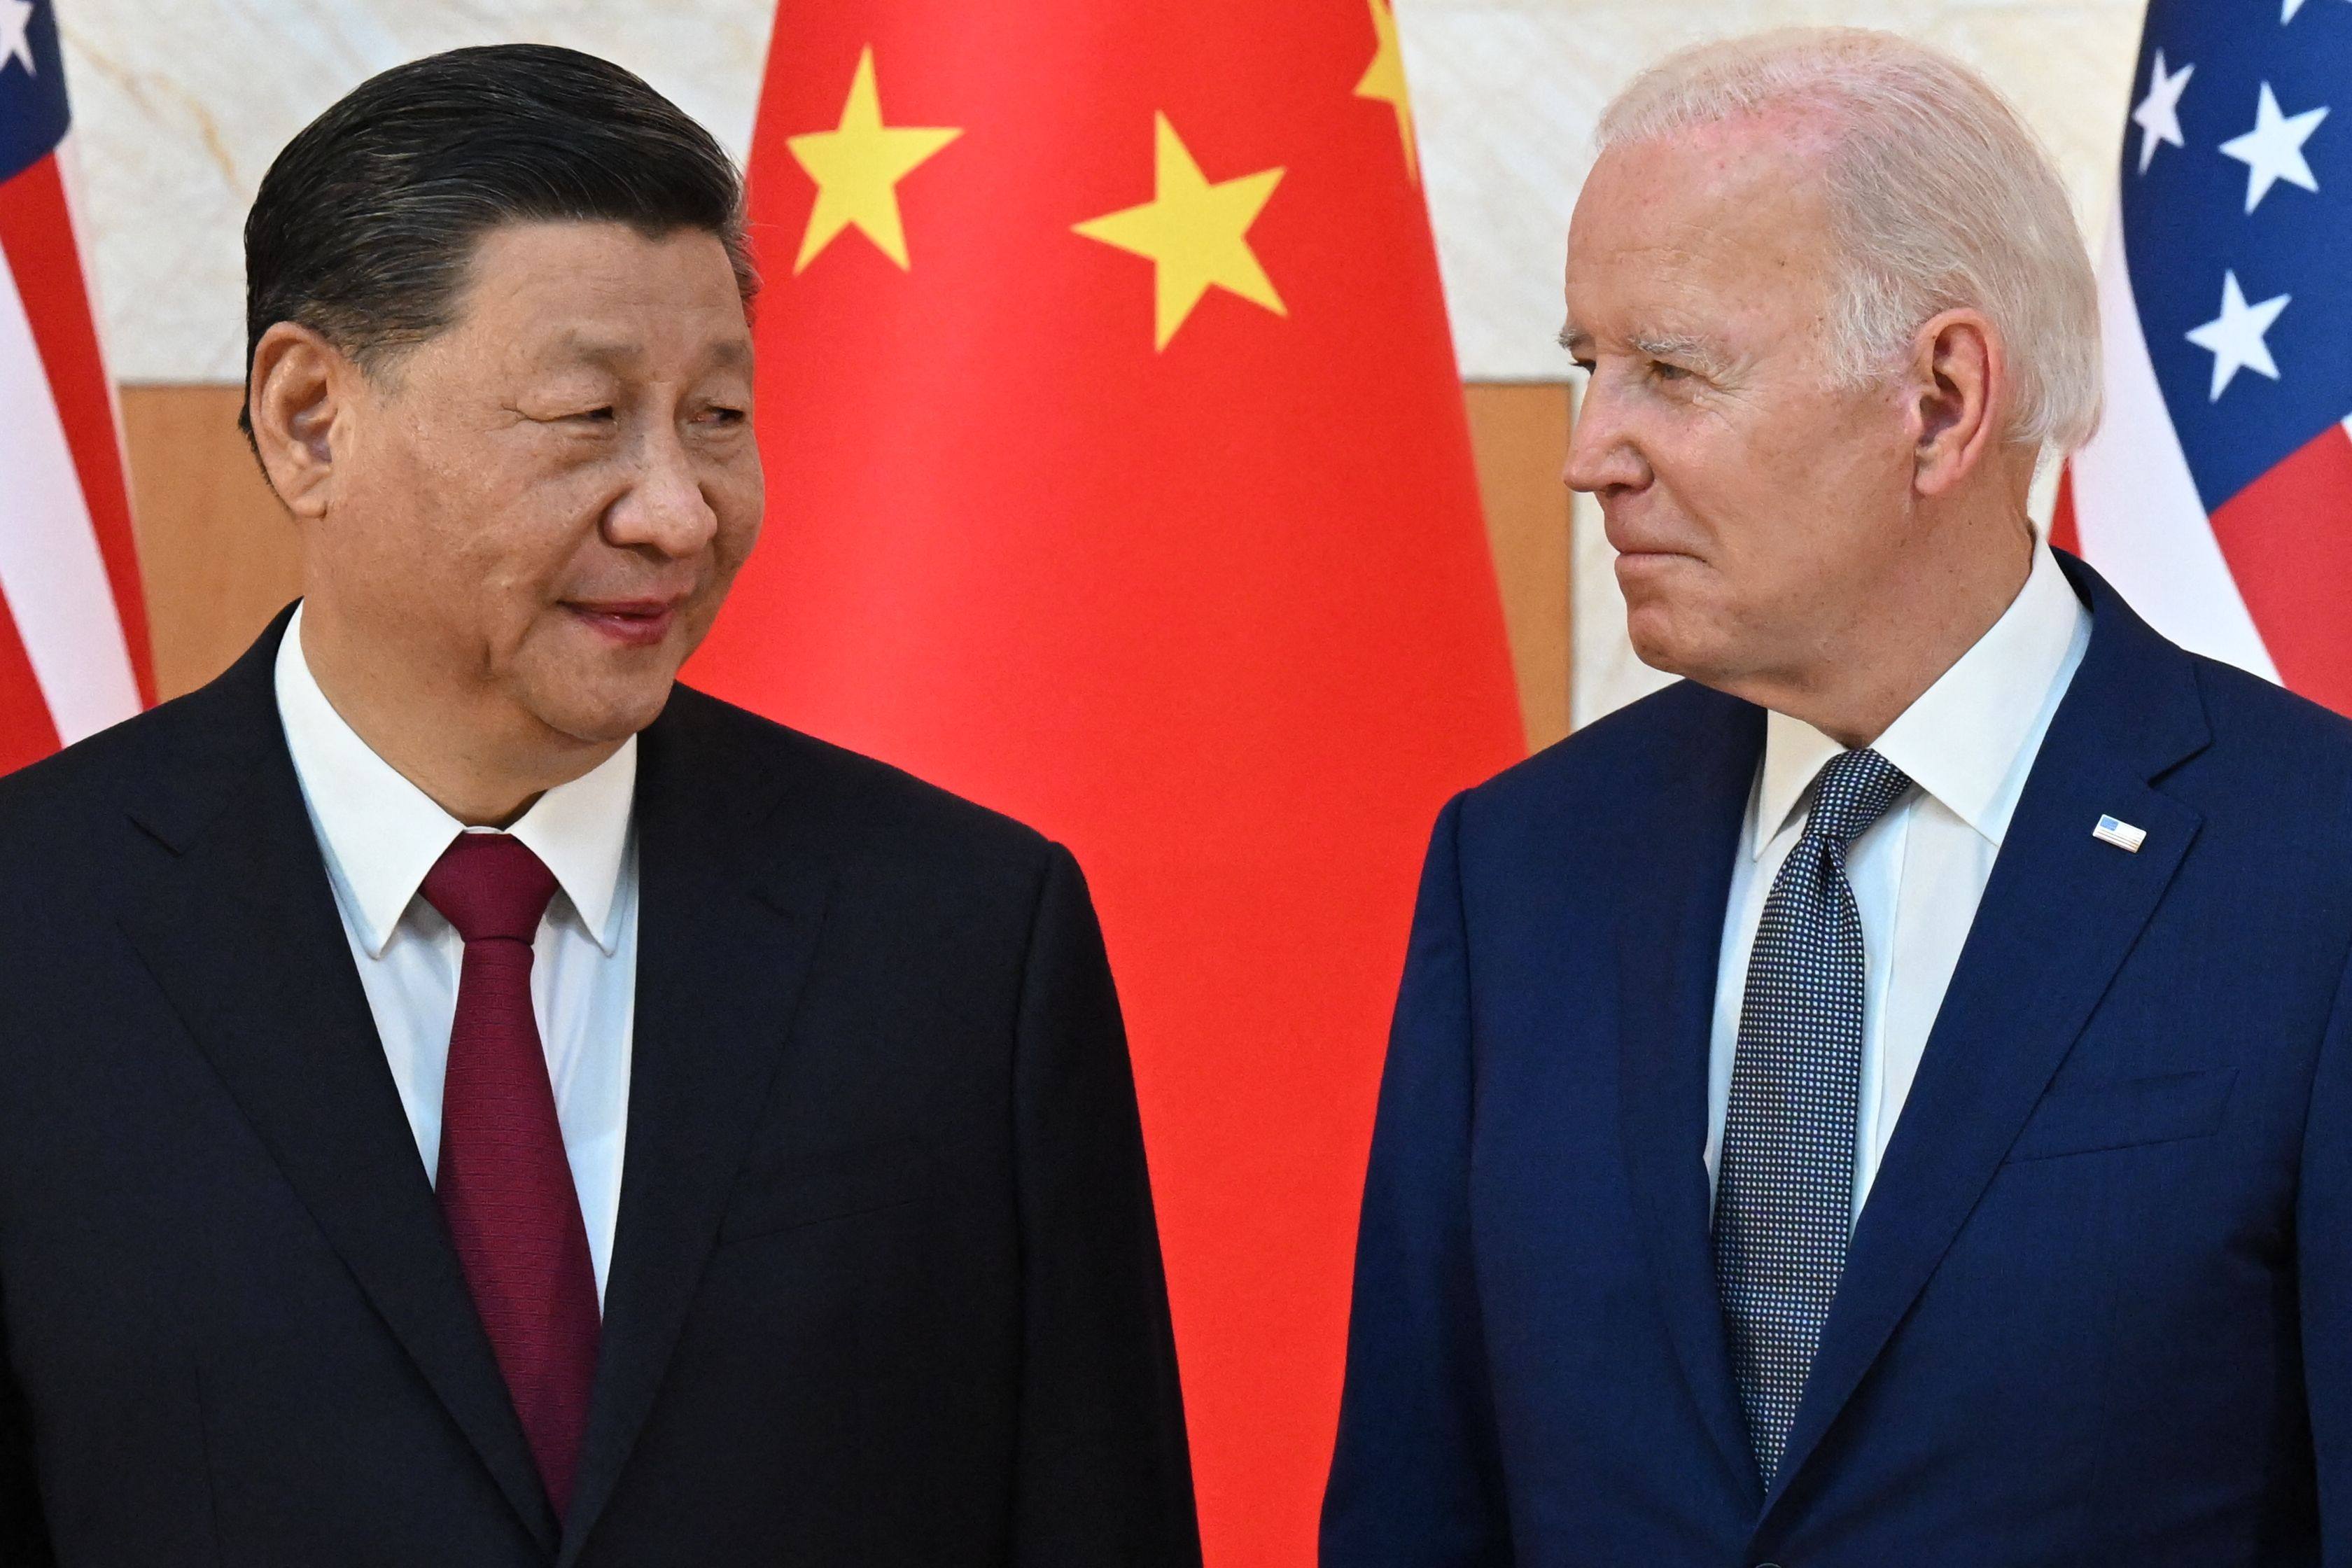 China’s President Xi Jinping and US President Joe Biden are expected to meet at the Apec Summit in San Francisco this week. Photo: AFP